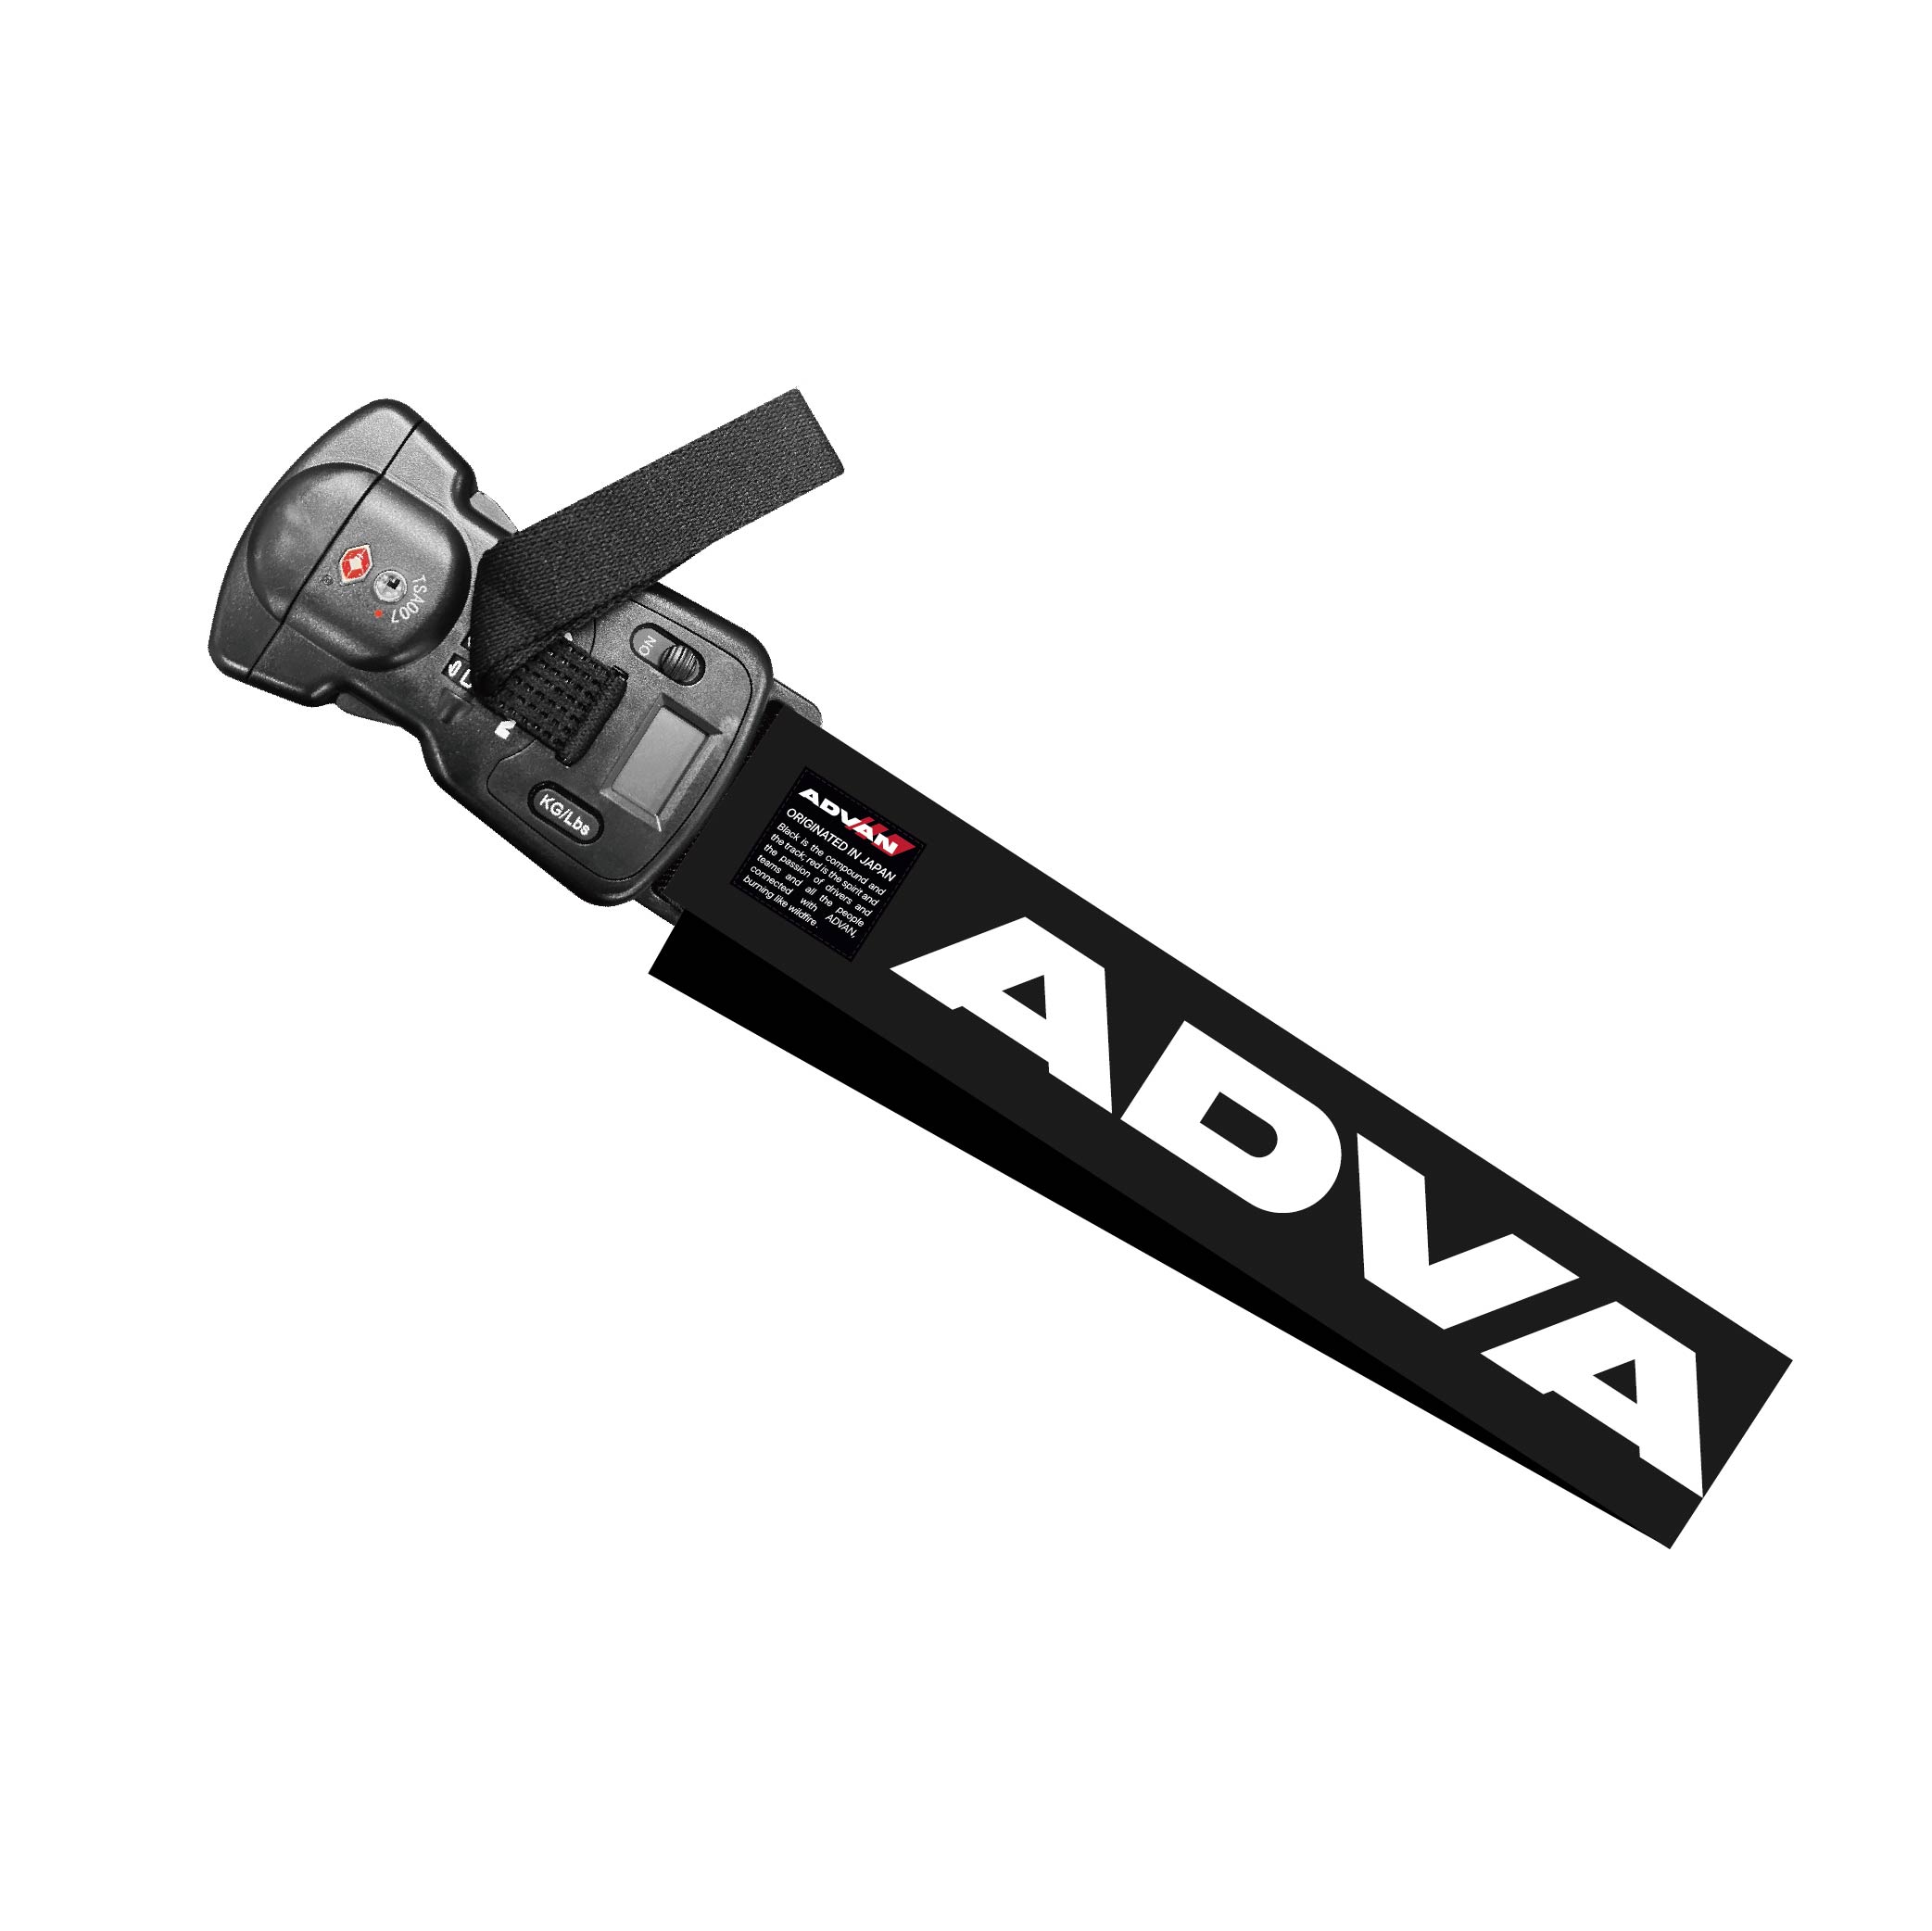 ADVAN Luggage Belt with Scale (Black & White)